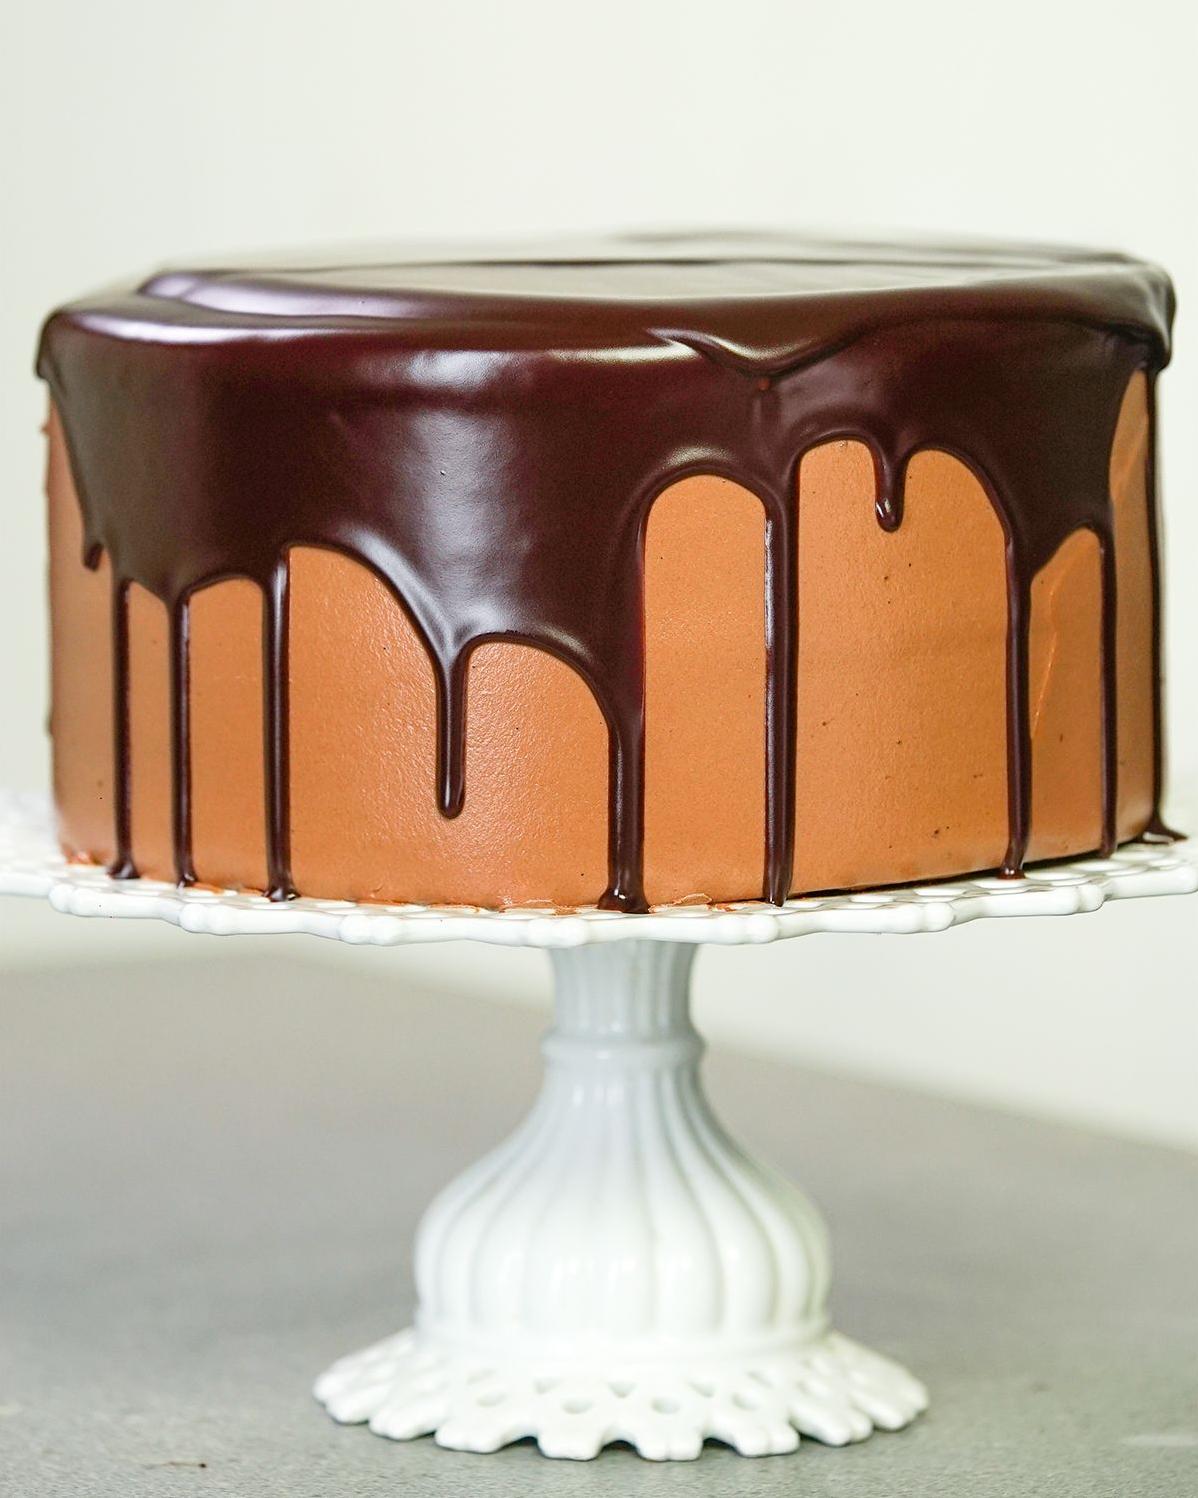  Who needs a spoon when you can pour this chocolate espresso icing straight into your mouth?